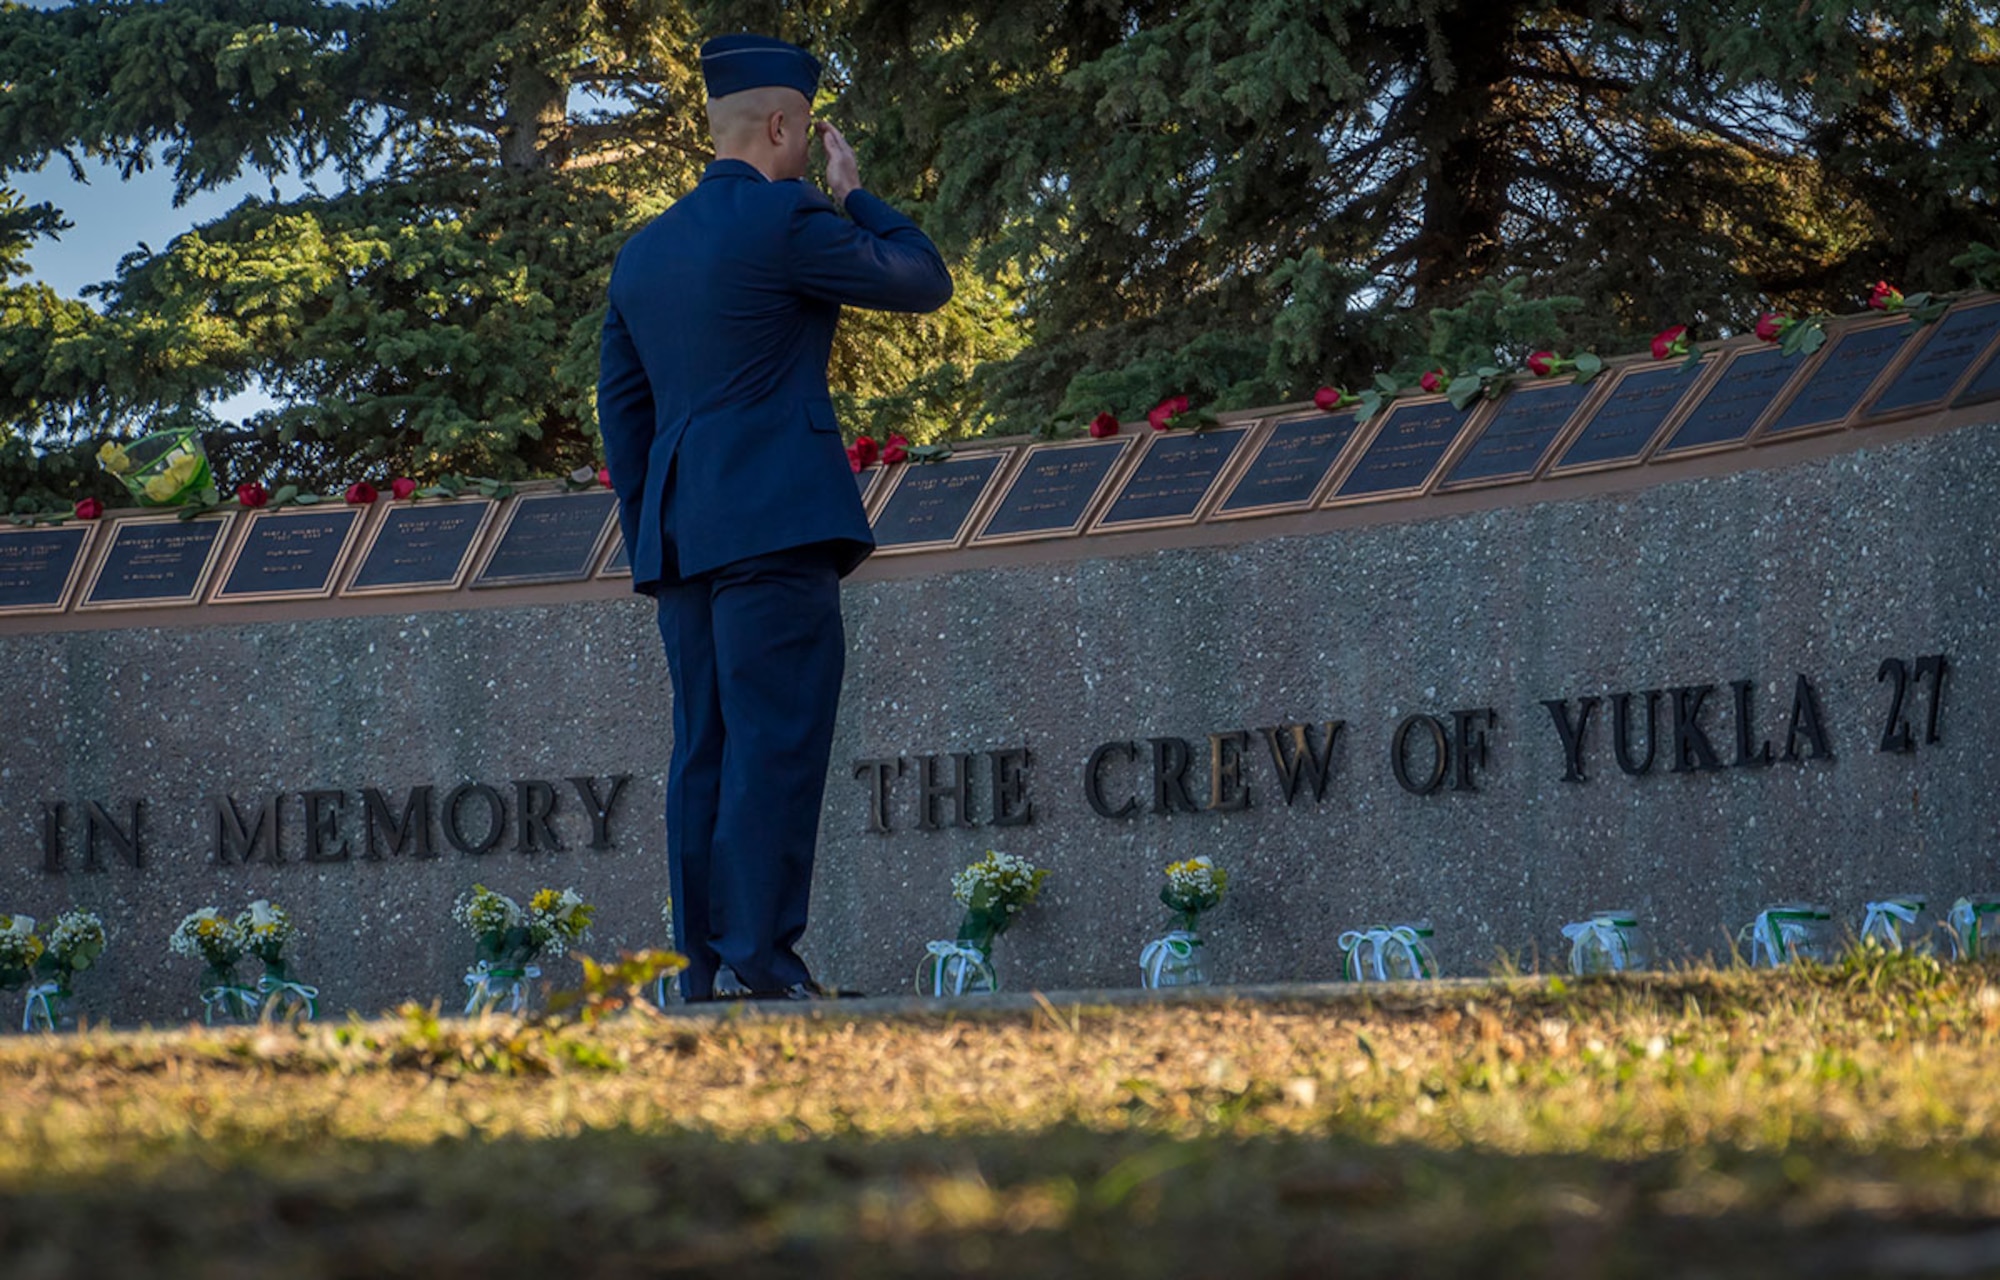 An Airman salutes after placing flowers during a ceremony as American, and Canadian Airmen assigned to the 962nd Airborne Air Control Squadron, distinguished guests, and surviving family members of the crew of the E-3B Sentry, Airborne Warning and Control System aircraft, call sign "YUKLA 27" gathered for 20th anniversary memorial ceremonies on Joint Base Elmendorf-Richardson, Alaska, Tuesday, Sept. 22, 2015. On Elmendorf Air Force Base, Sept. 22, 1995, the “YUKLA 27" aircraft from the 962nd Airborne Air Control Squadron encountered a flock of geese and crashed shortly after takeoff on a routine surveillance training sortie, killing all 24 U.S. and Canadian Airmen aboard. (U.S. Air Force photo/Justin Connaher)